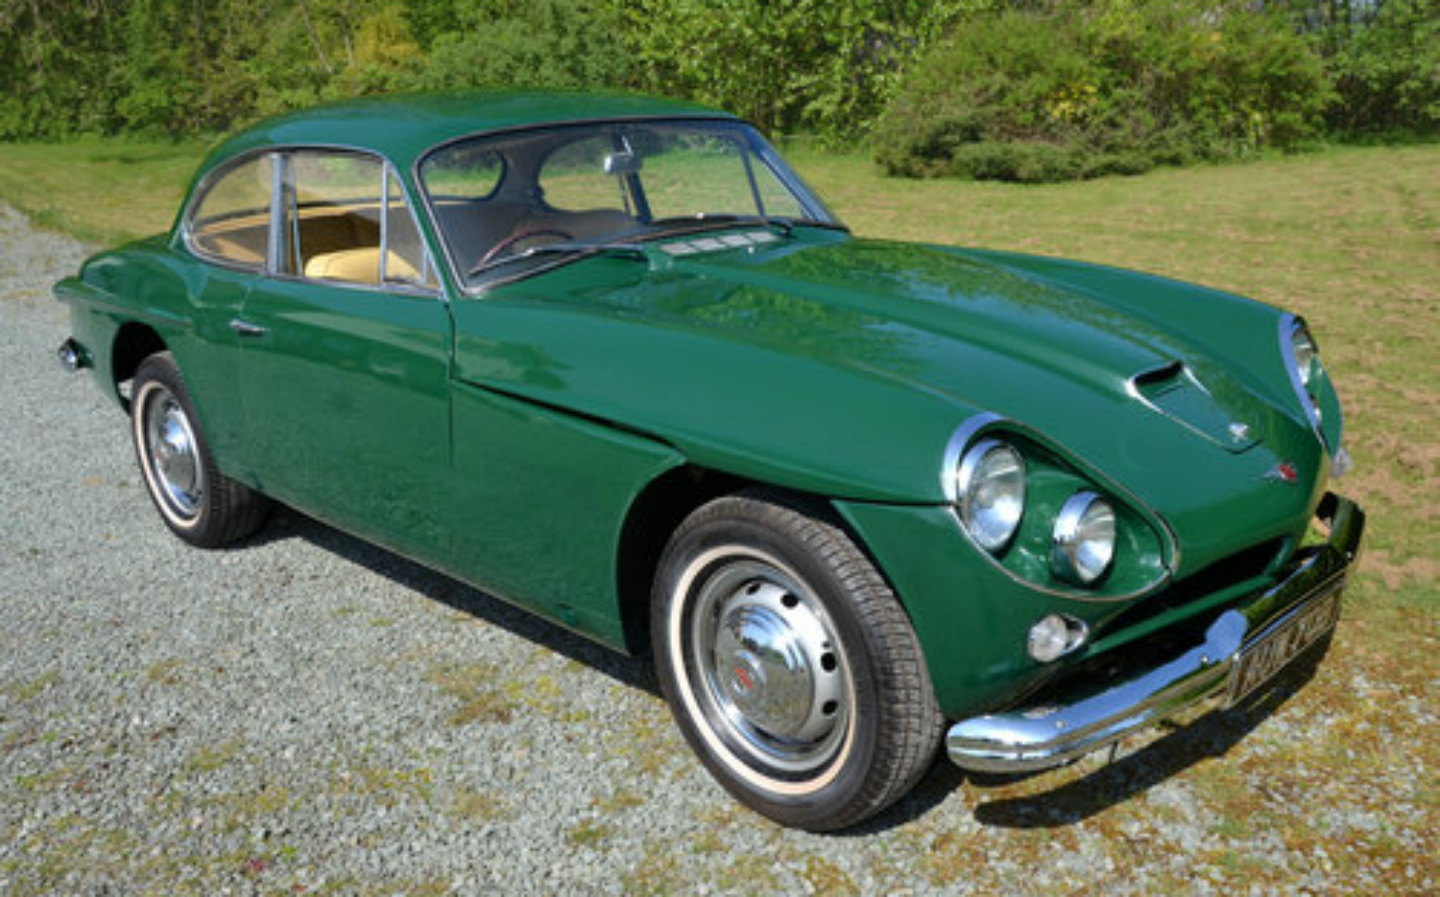 Sean Connery's Jensen C-V8 sports car up for sale